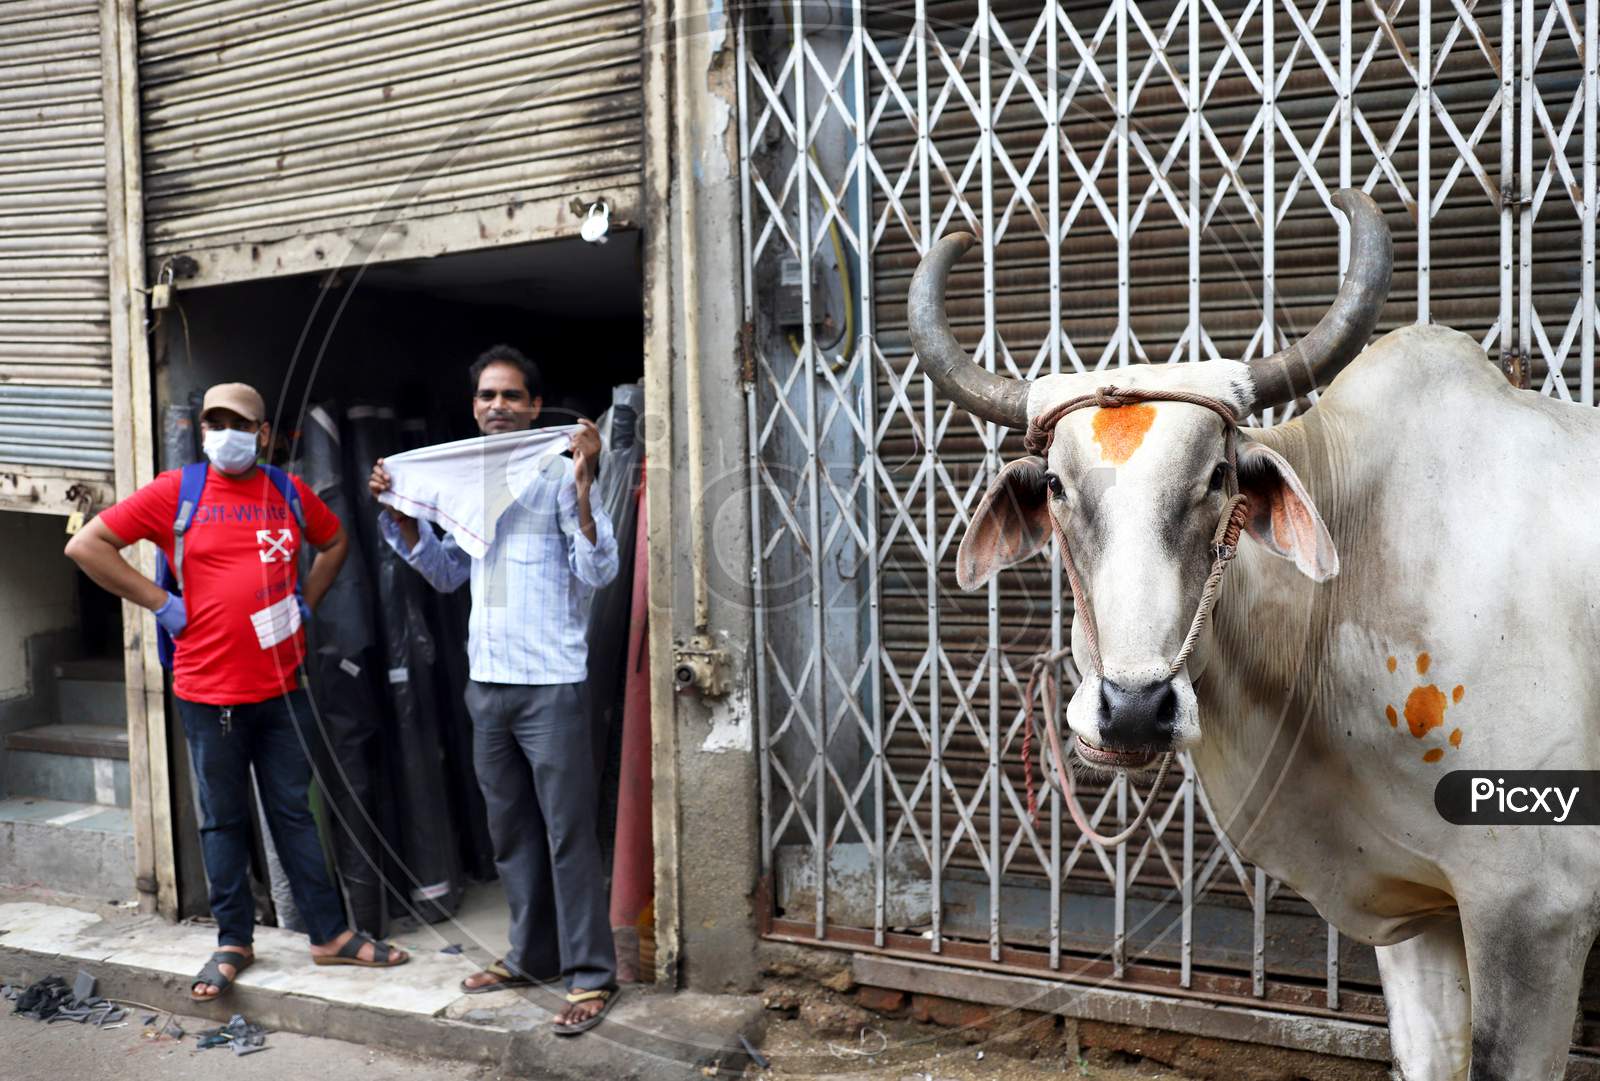 A man wears a mask while he stands next to an ox in Paharganj in New Delhi on July 07, 2020